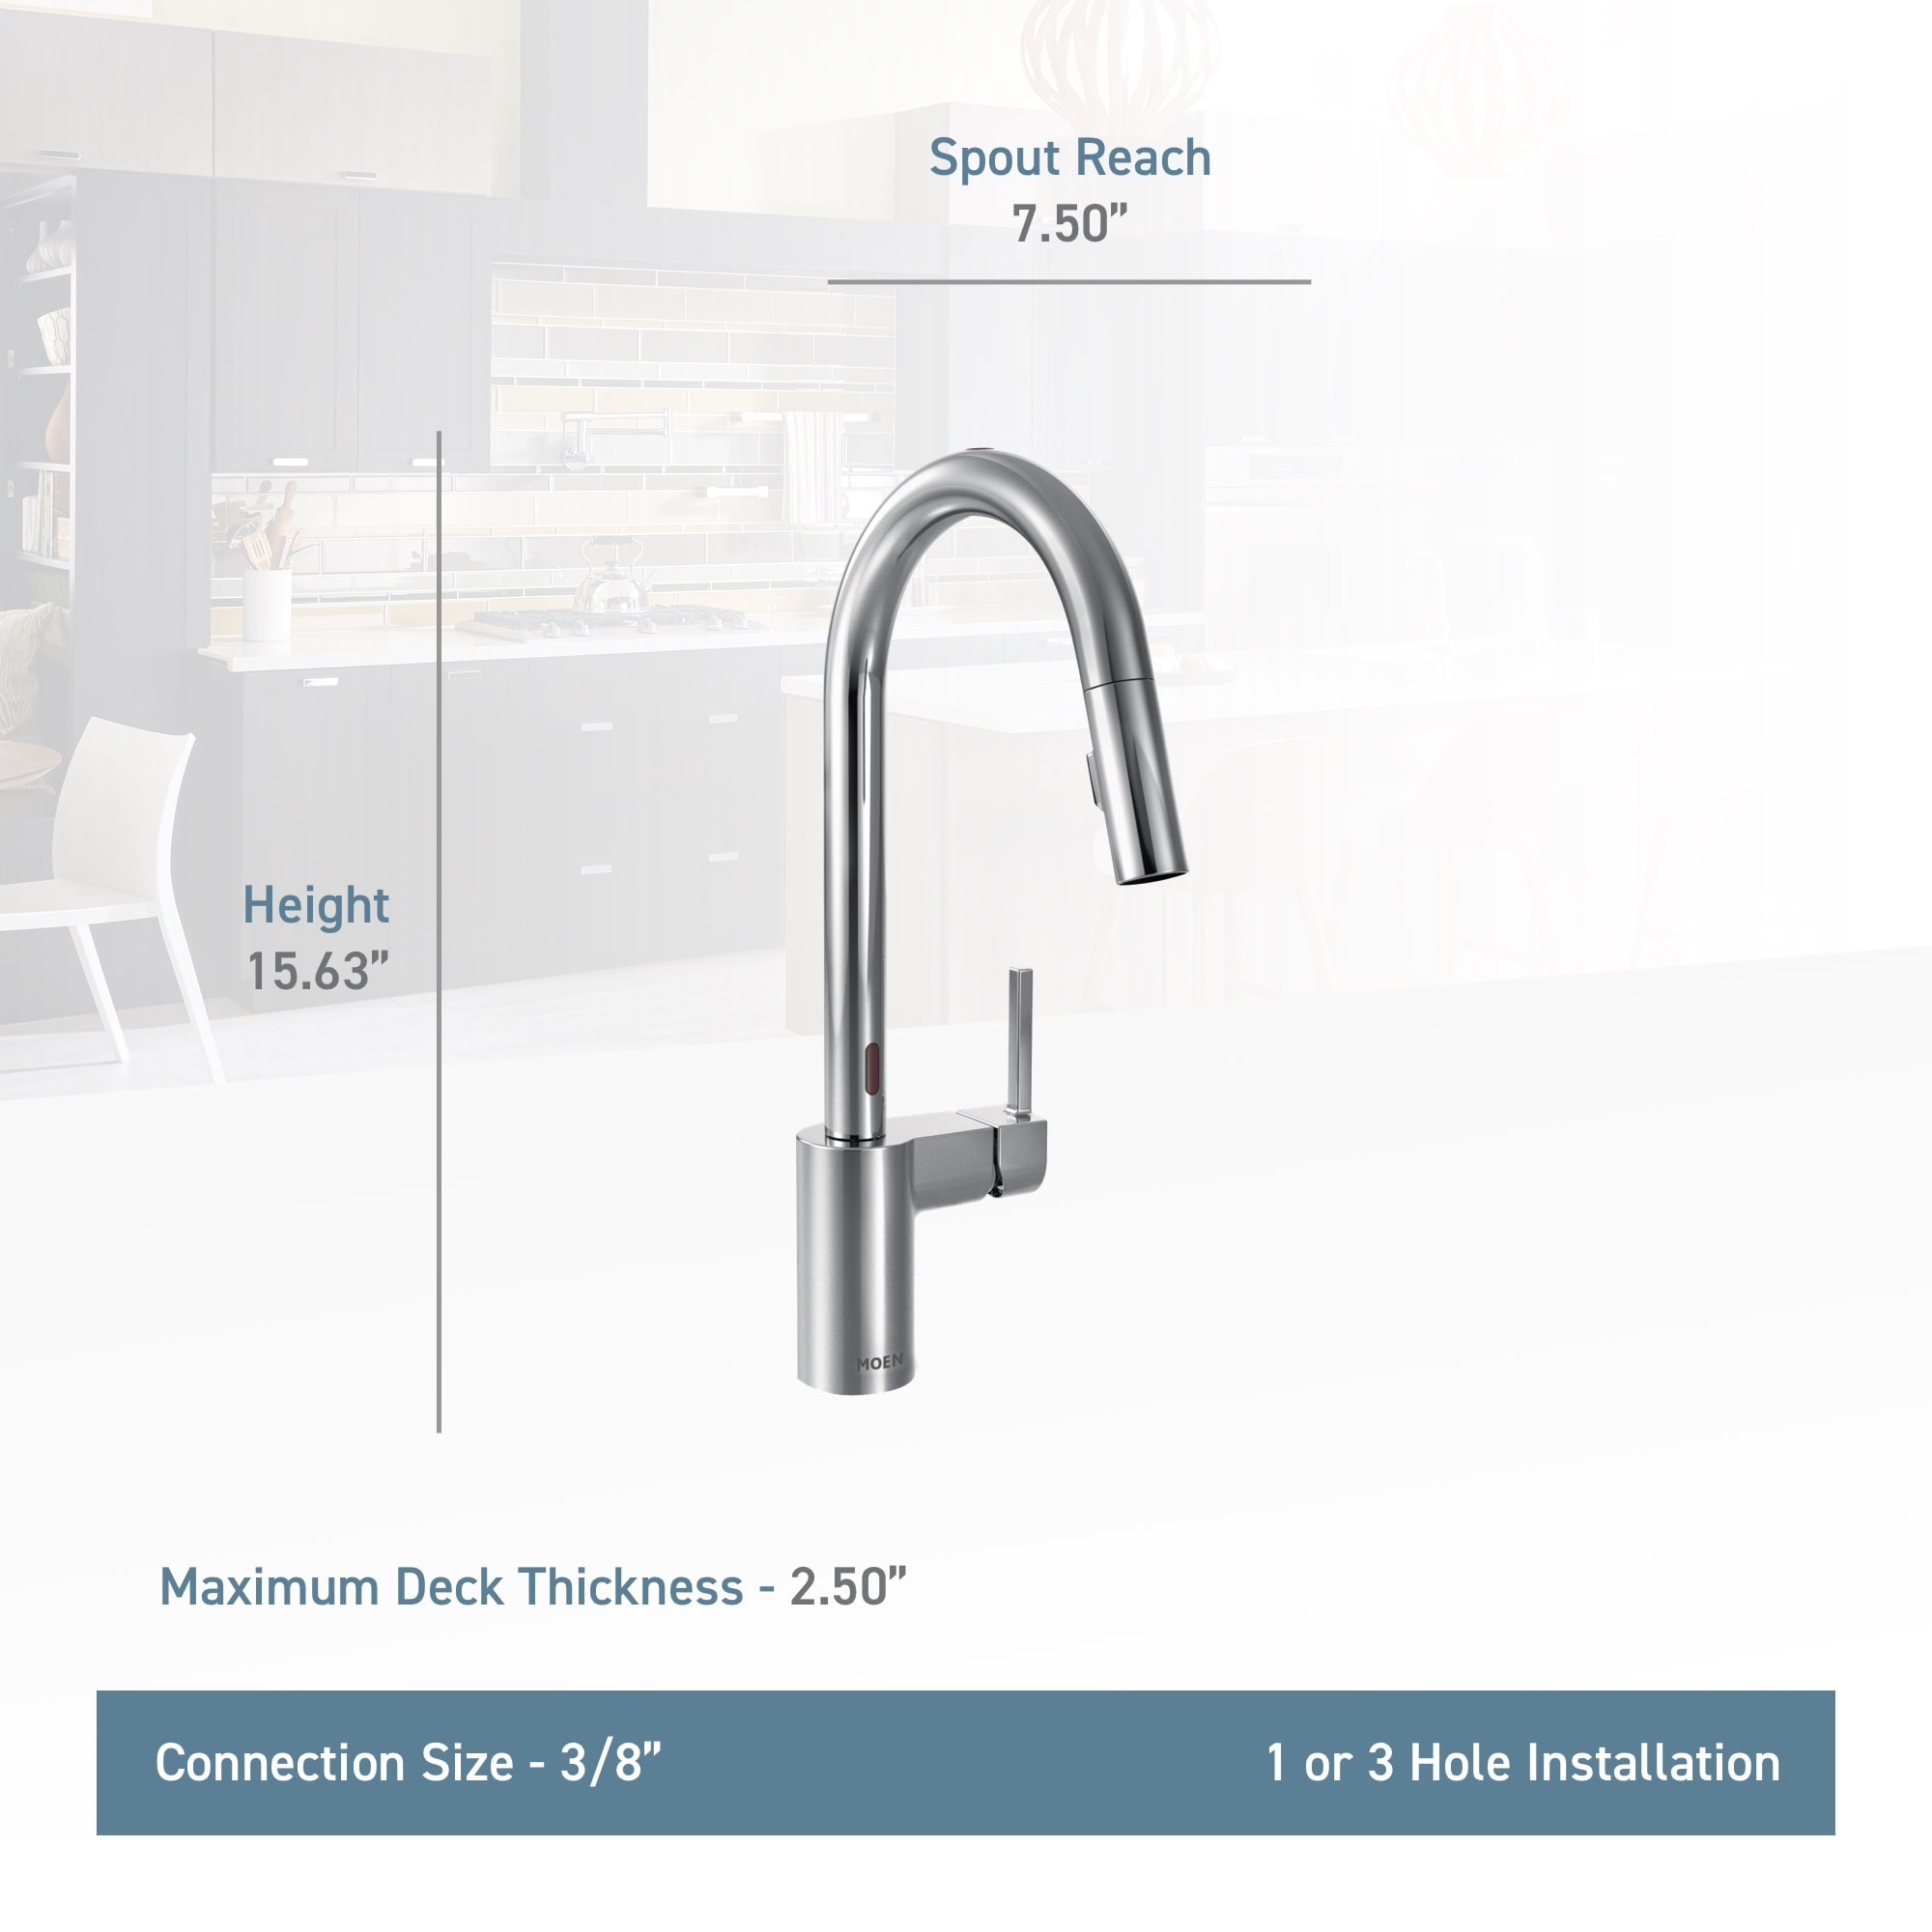 Moen 7565e Align Metal Touchless Pullout Spray High Arc Kitchen Faucet Overstock 17032678 Spot Resist Stainless